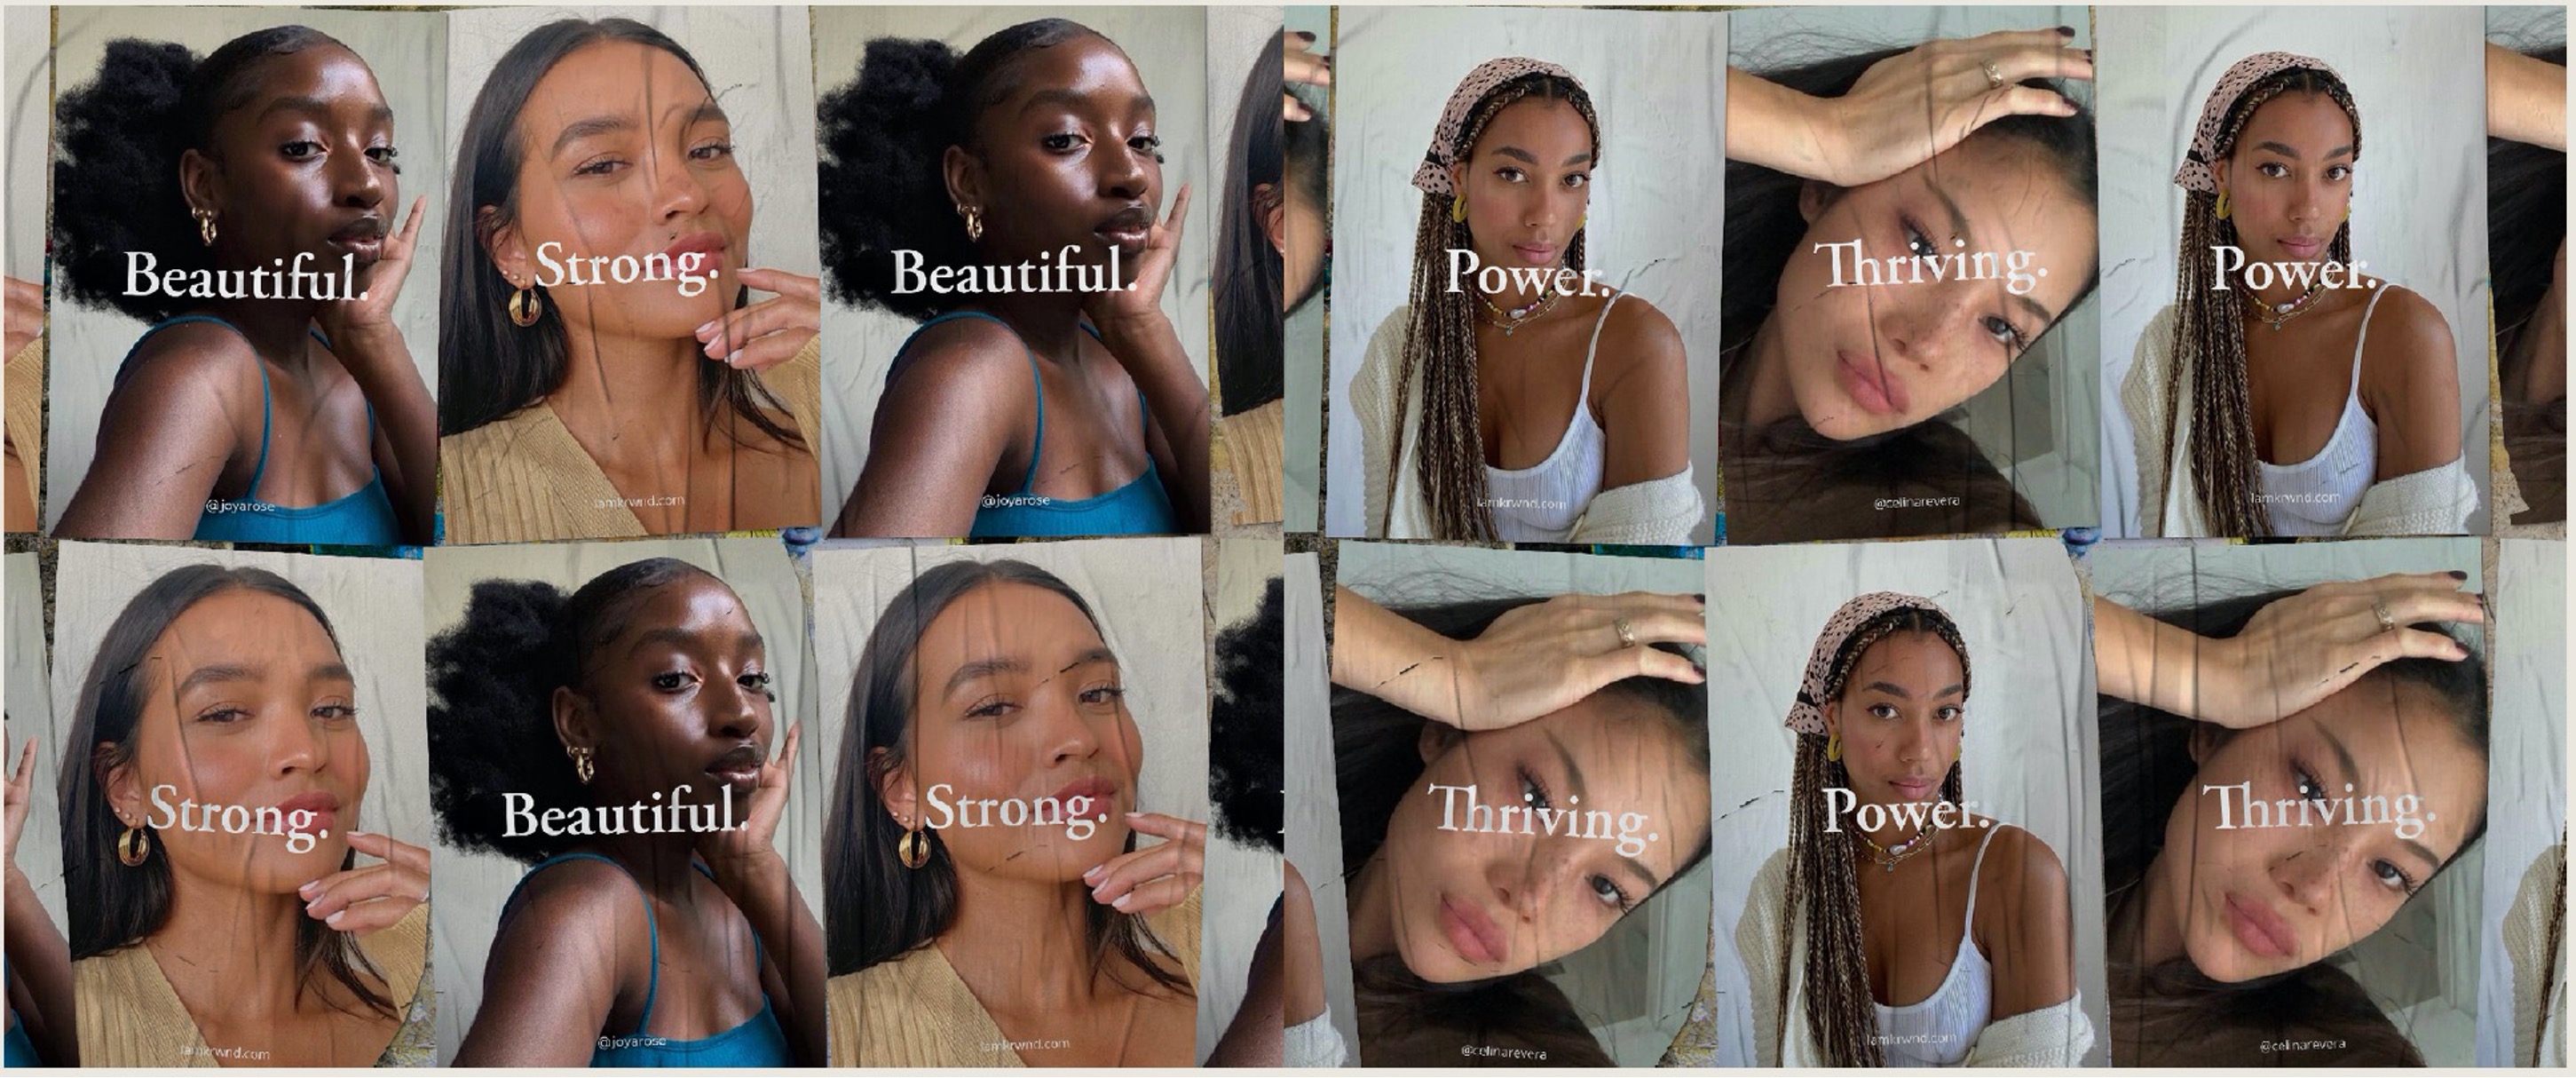 Photo documentation of a poster campaign featuring portraits of young women. 